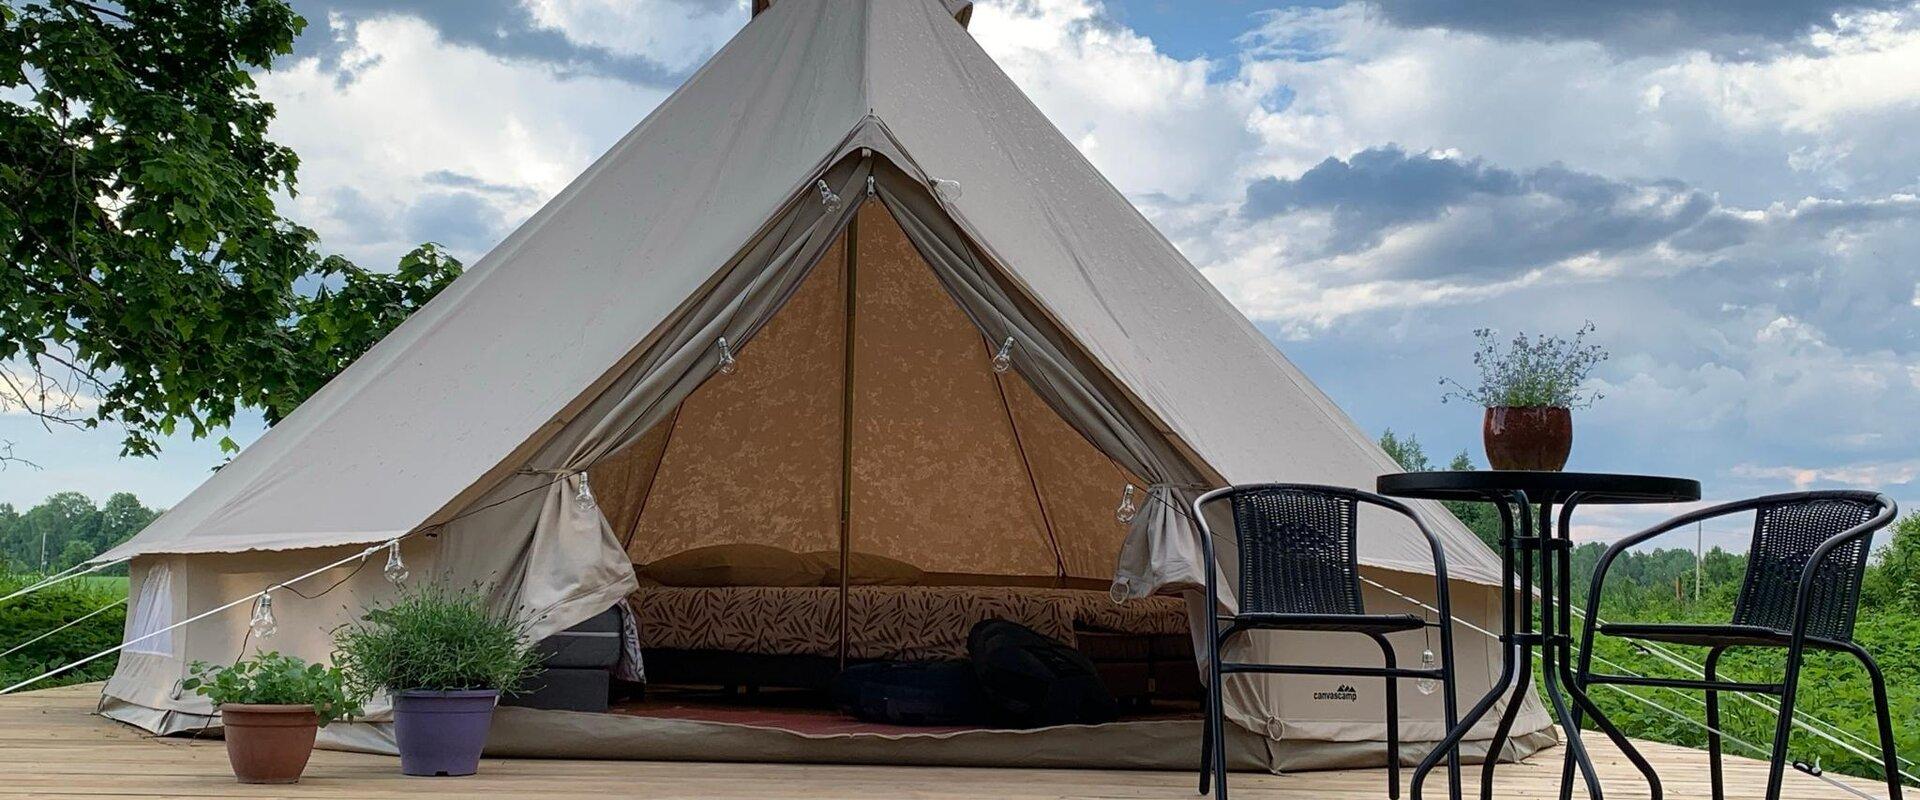 Comfortable accommodation in a spacious tent that's equipped with everything you need for a cosy stay. One tent has beds for up to four people where y